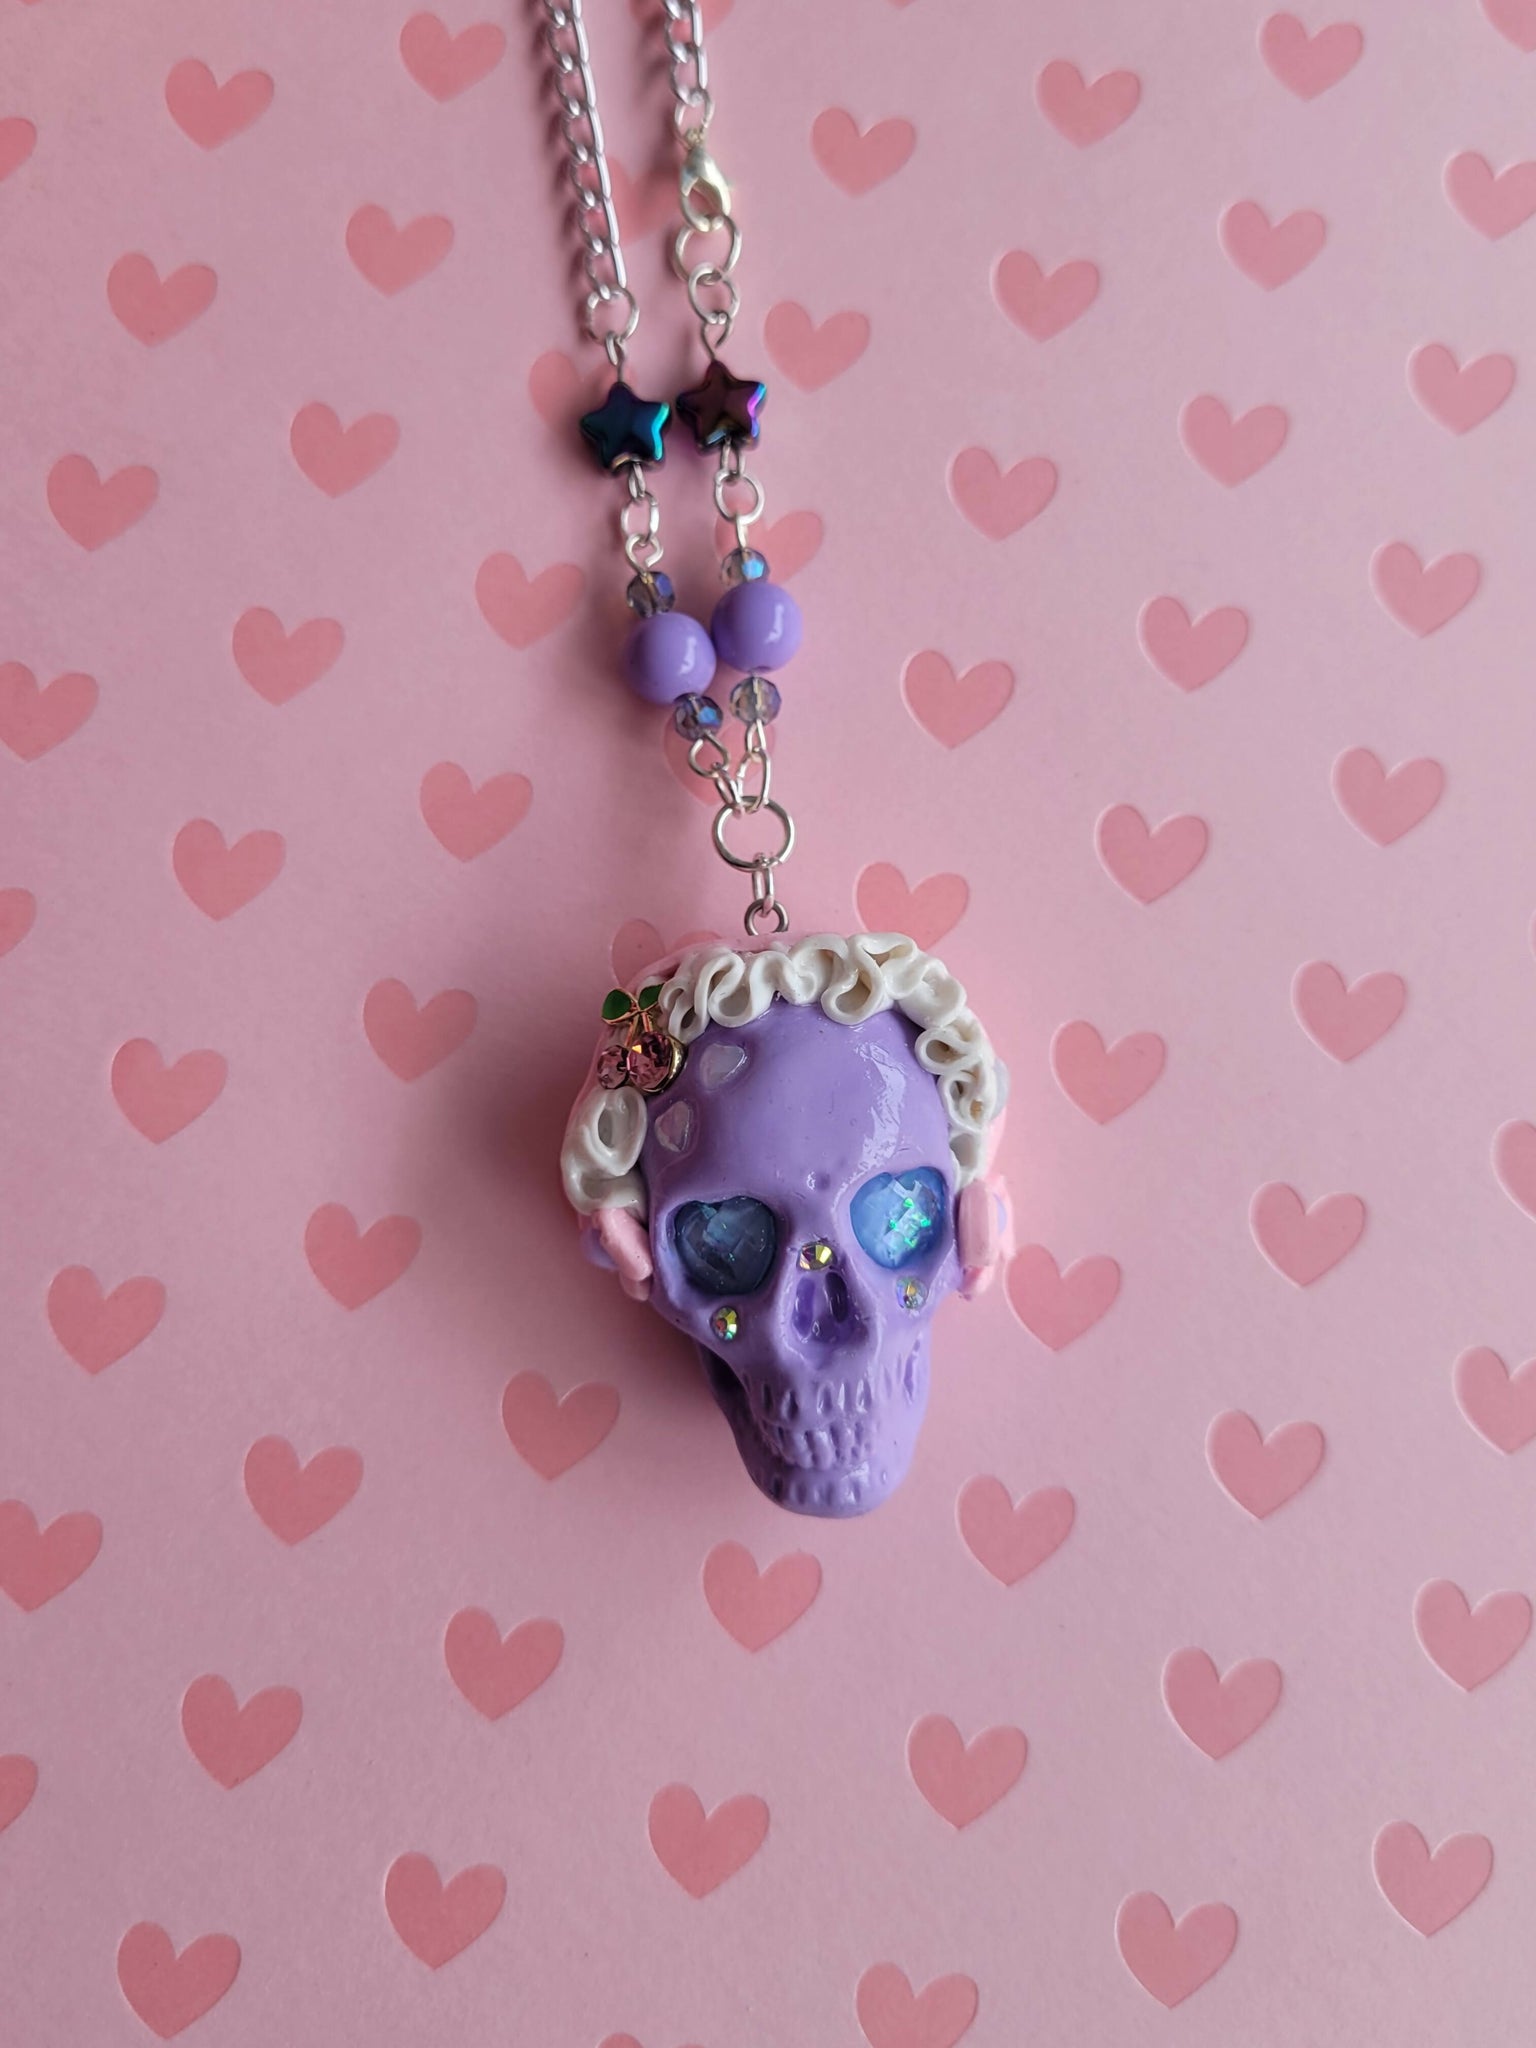 Fancy Candy Skull Necklace